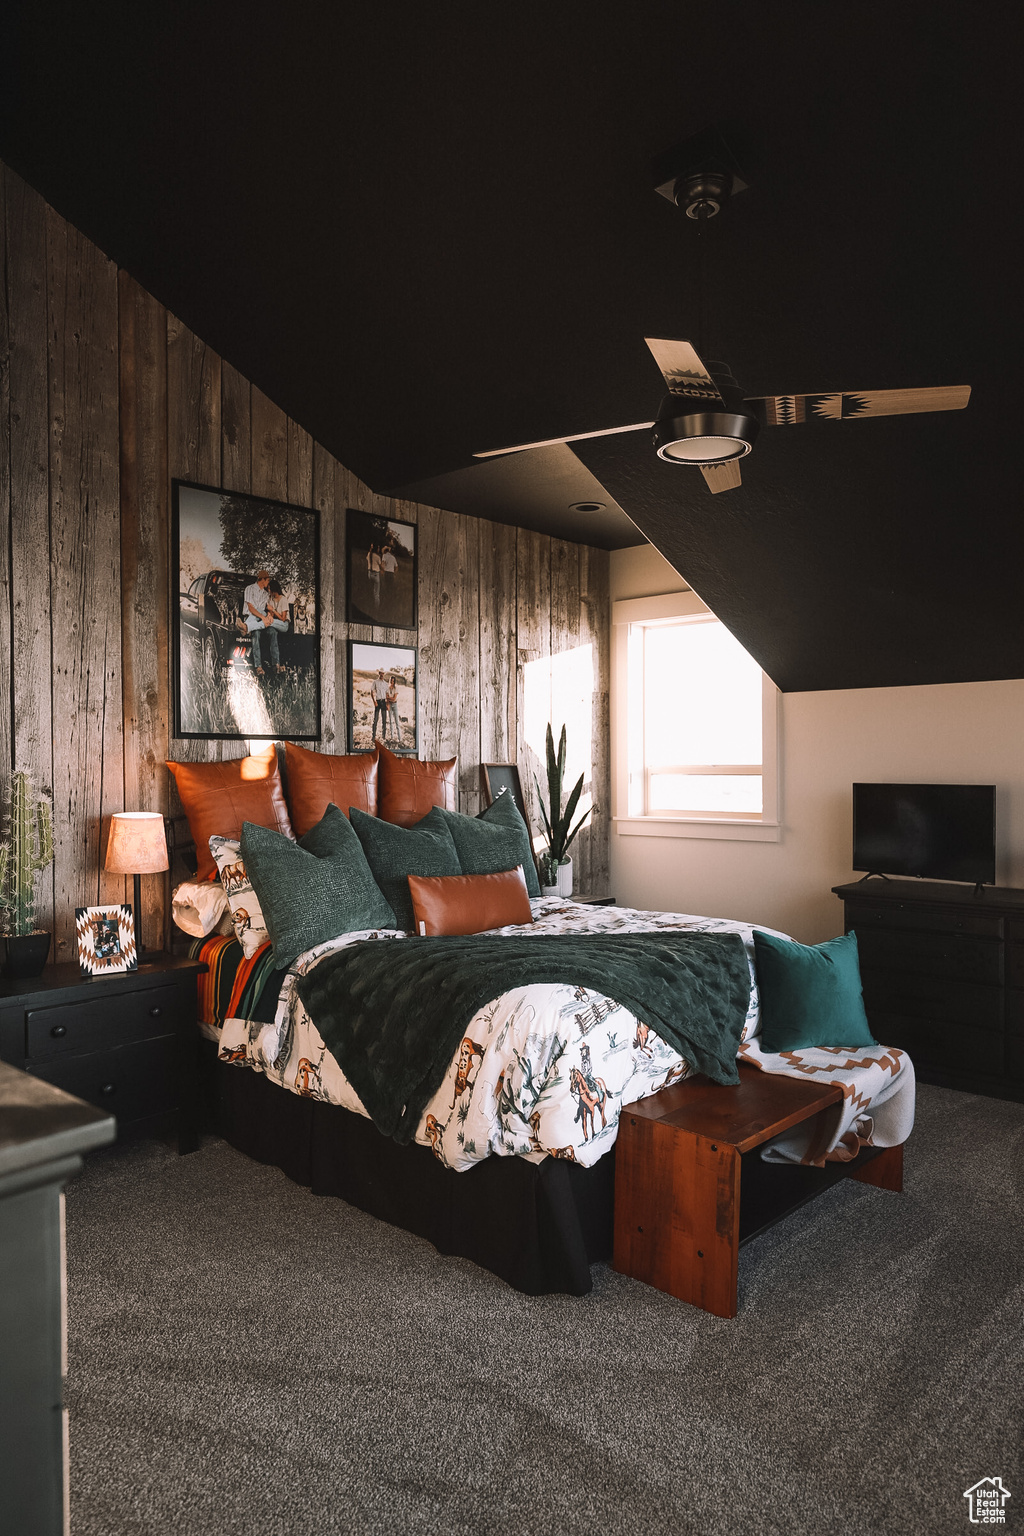 Bedroom featuring wooden walls, carpet floors, and lofted ceiling